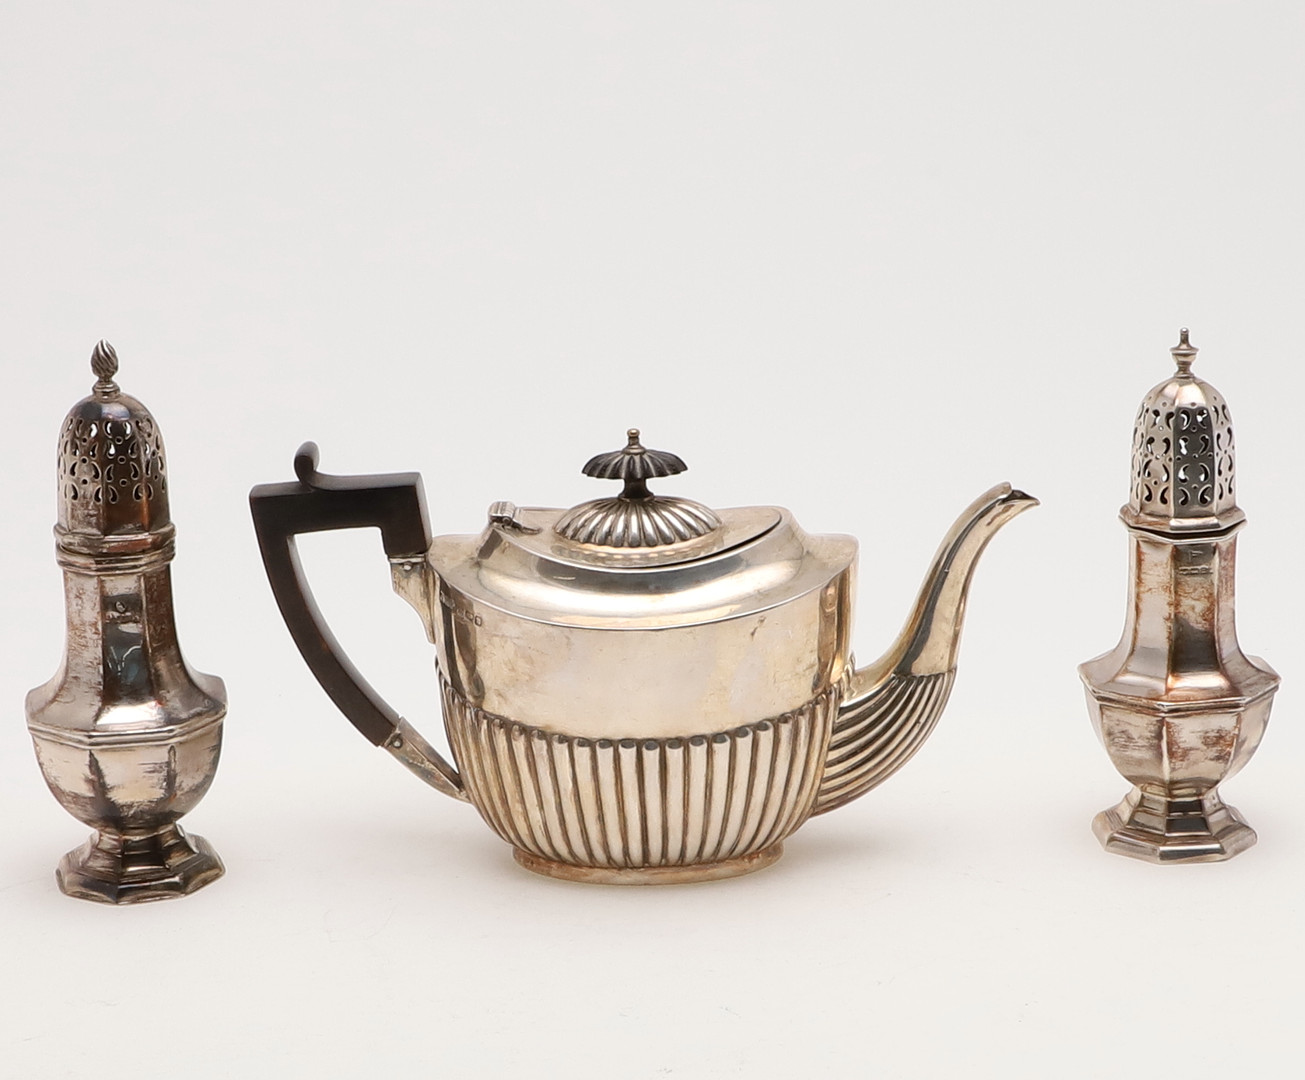 A LATE 19TH/ EARLY 20TH CENTURY TEAPOT. - Image 3 of 5